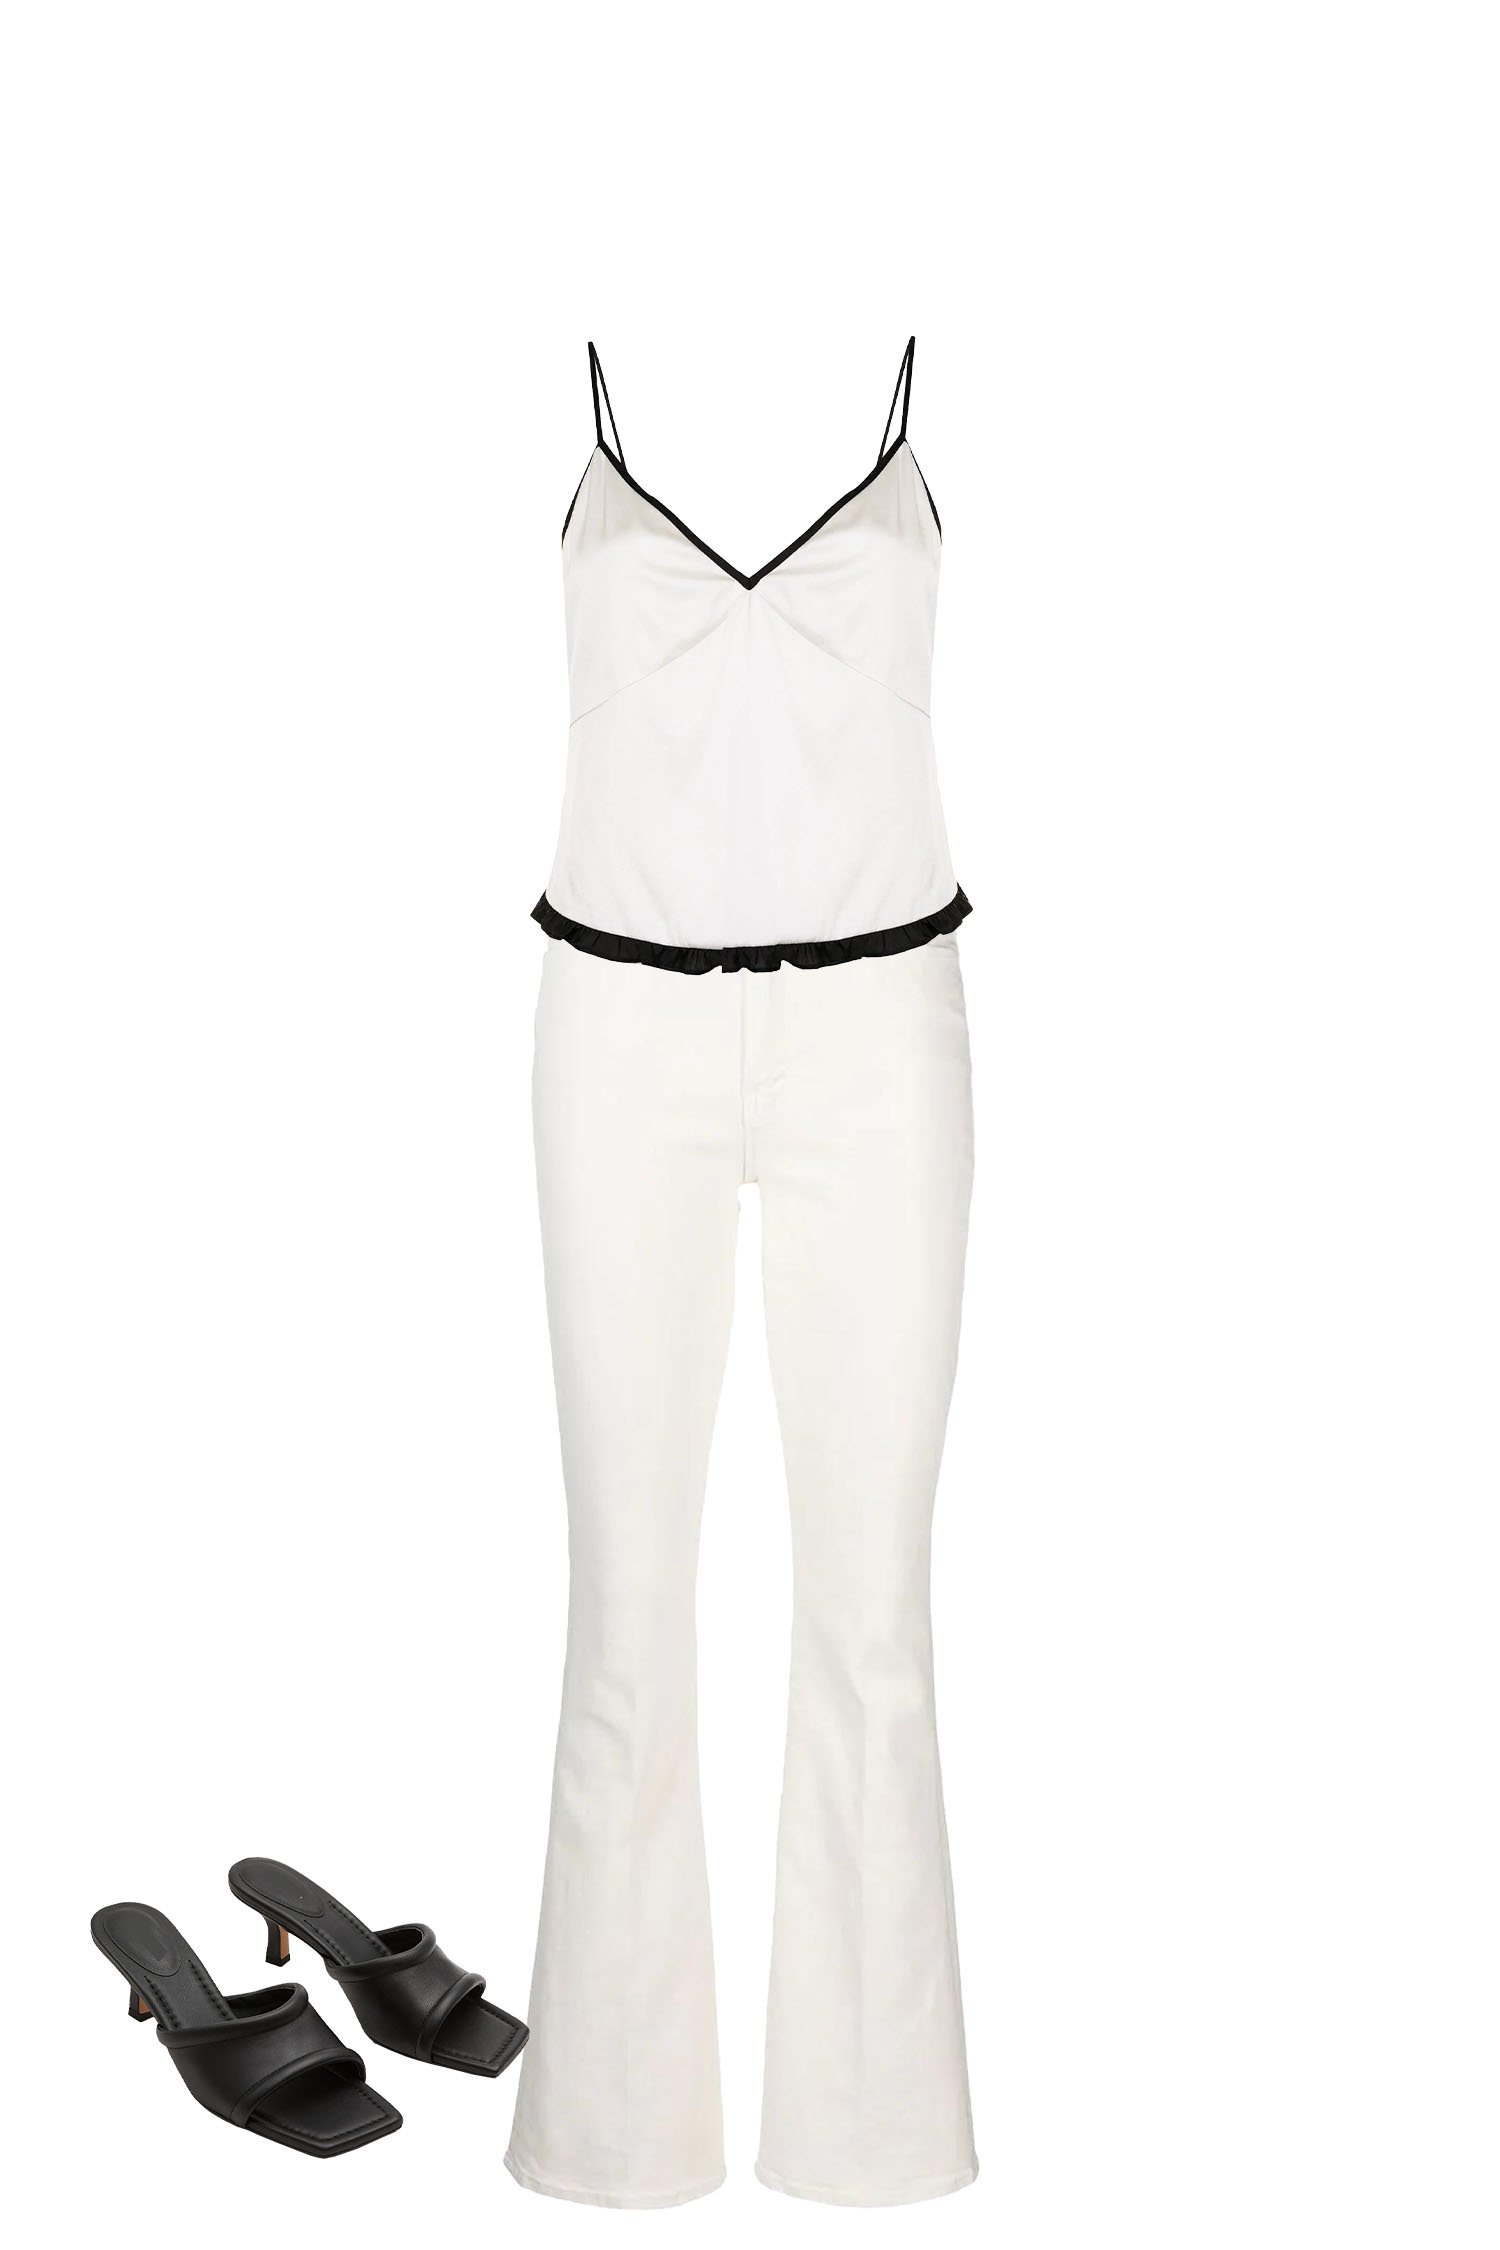 White High Waisted Flare Jeans Outfit with a White Camisole and Black Square-Toe Kitten Sandals